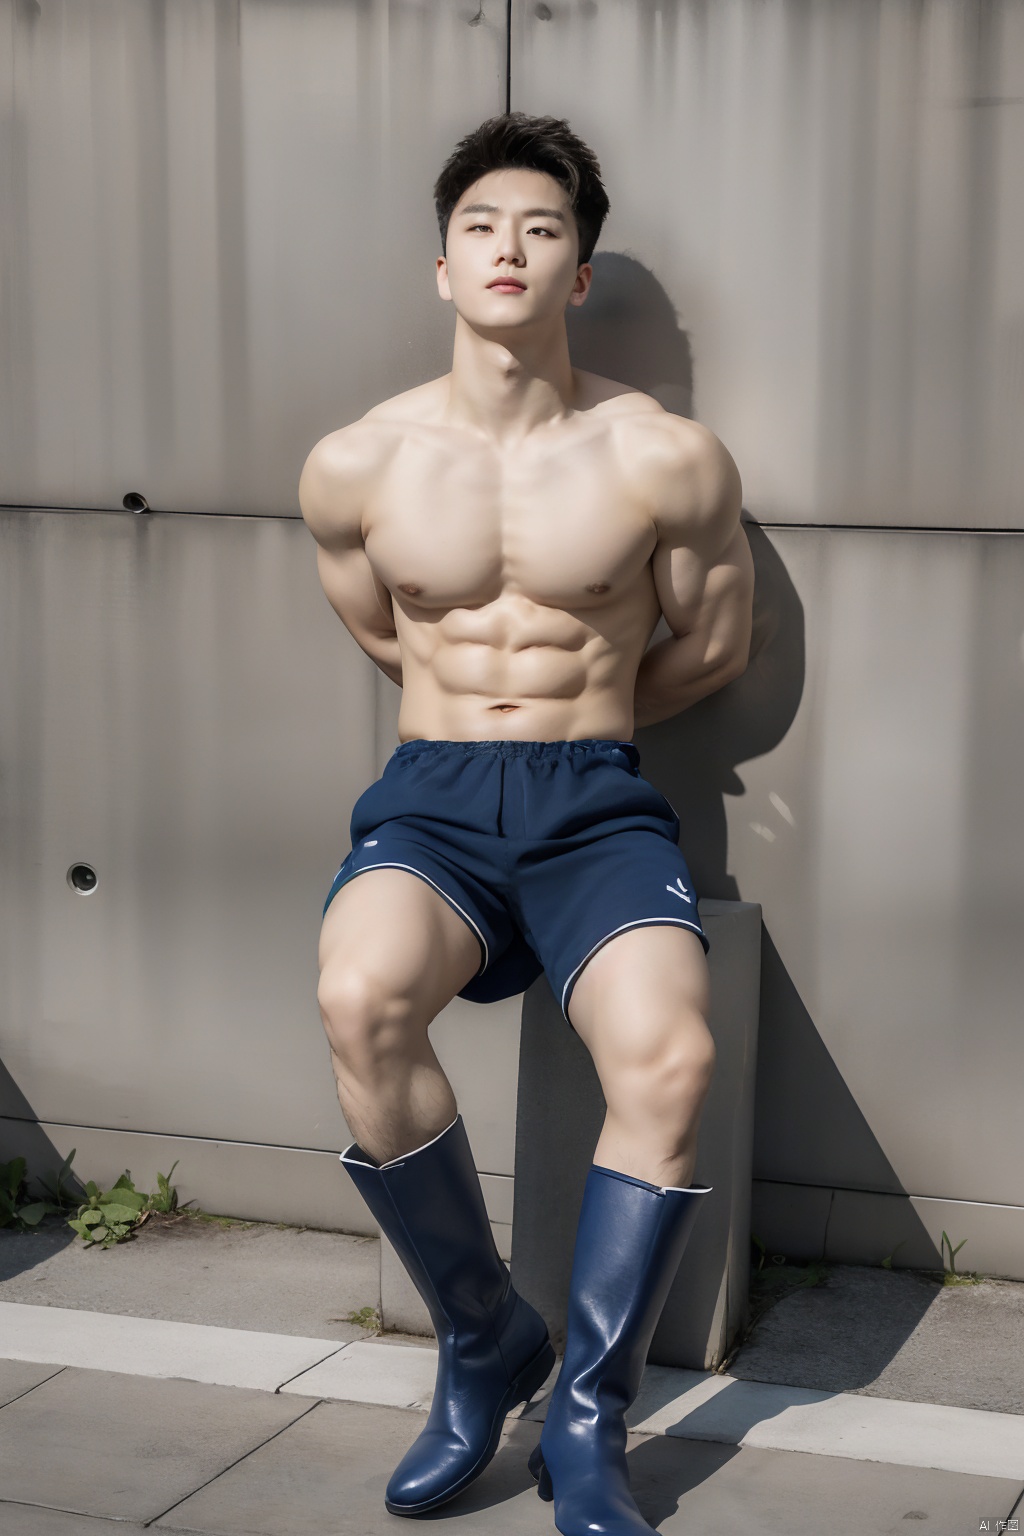  best quality, masterpiece, super high resolution, simple background, realism, illustrations, volumetric lighting,
single,1boy, muscle, 
full body, power ranger, 
spread legs,
(arms behind back), Sitting on the ground, leaning againstthewall,,ridingboots,男,SaSangAAA,鐢蜂汉锛岀敺澹紝鐢峰锛岀敺锛岀敺瀛�